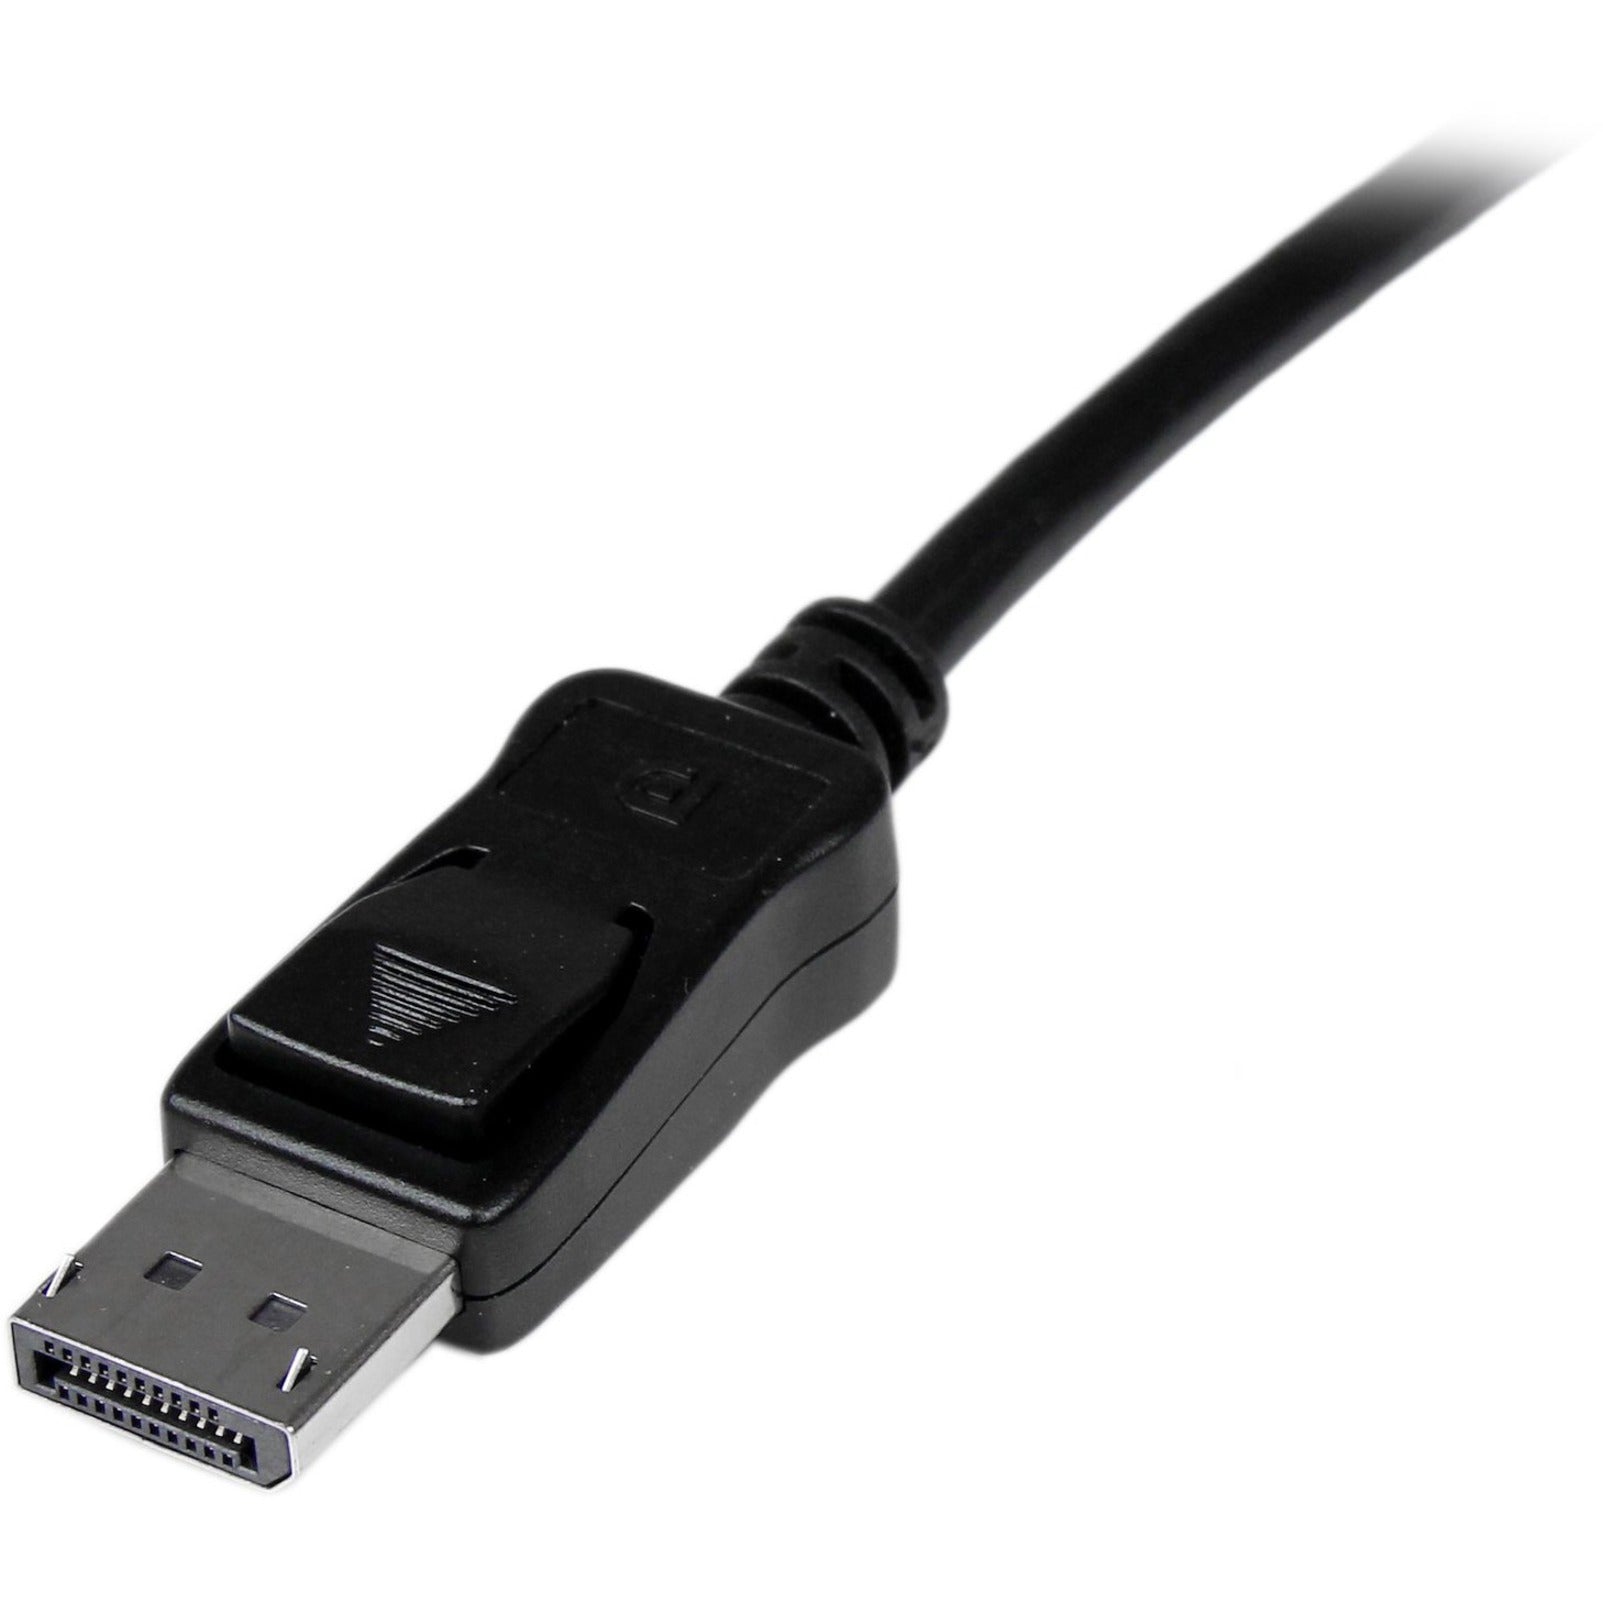 StarTech.com DISPL10MA 10m Active DisplayPort Cable - DP to DP M/M, 32.81 ft Video Cable, 10.8 Gbit/s Data Transfer Rate, 3840 x 2400 Supported Resolution